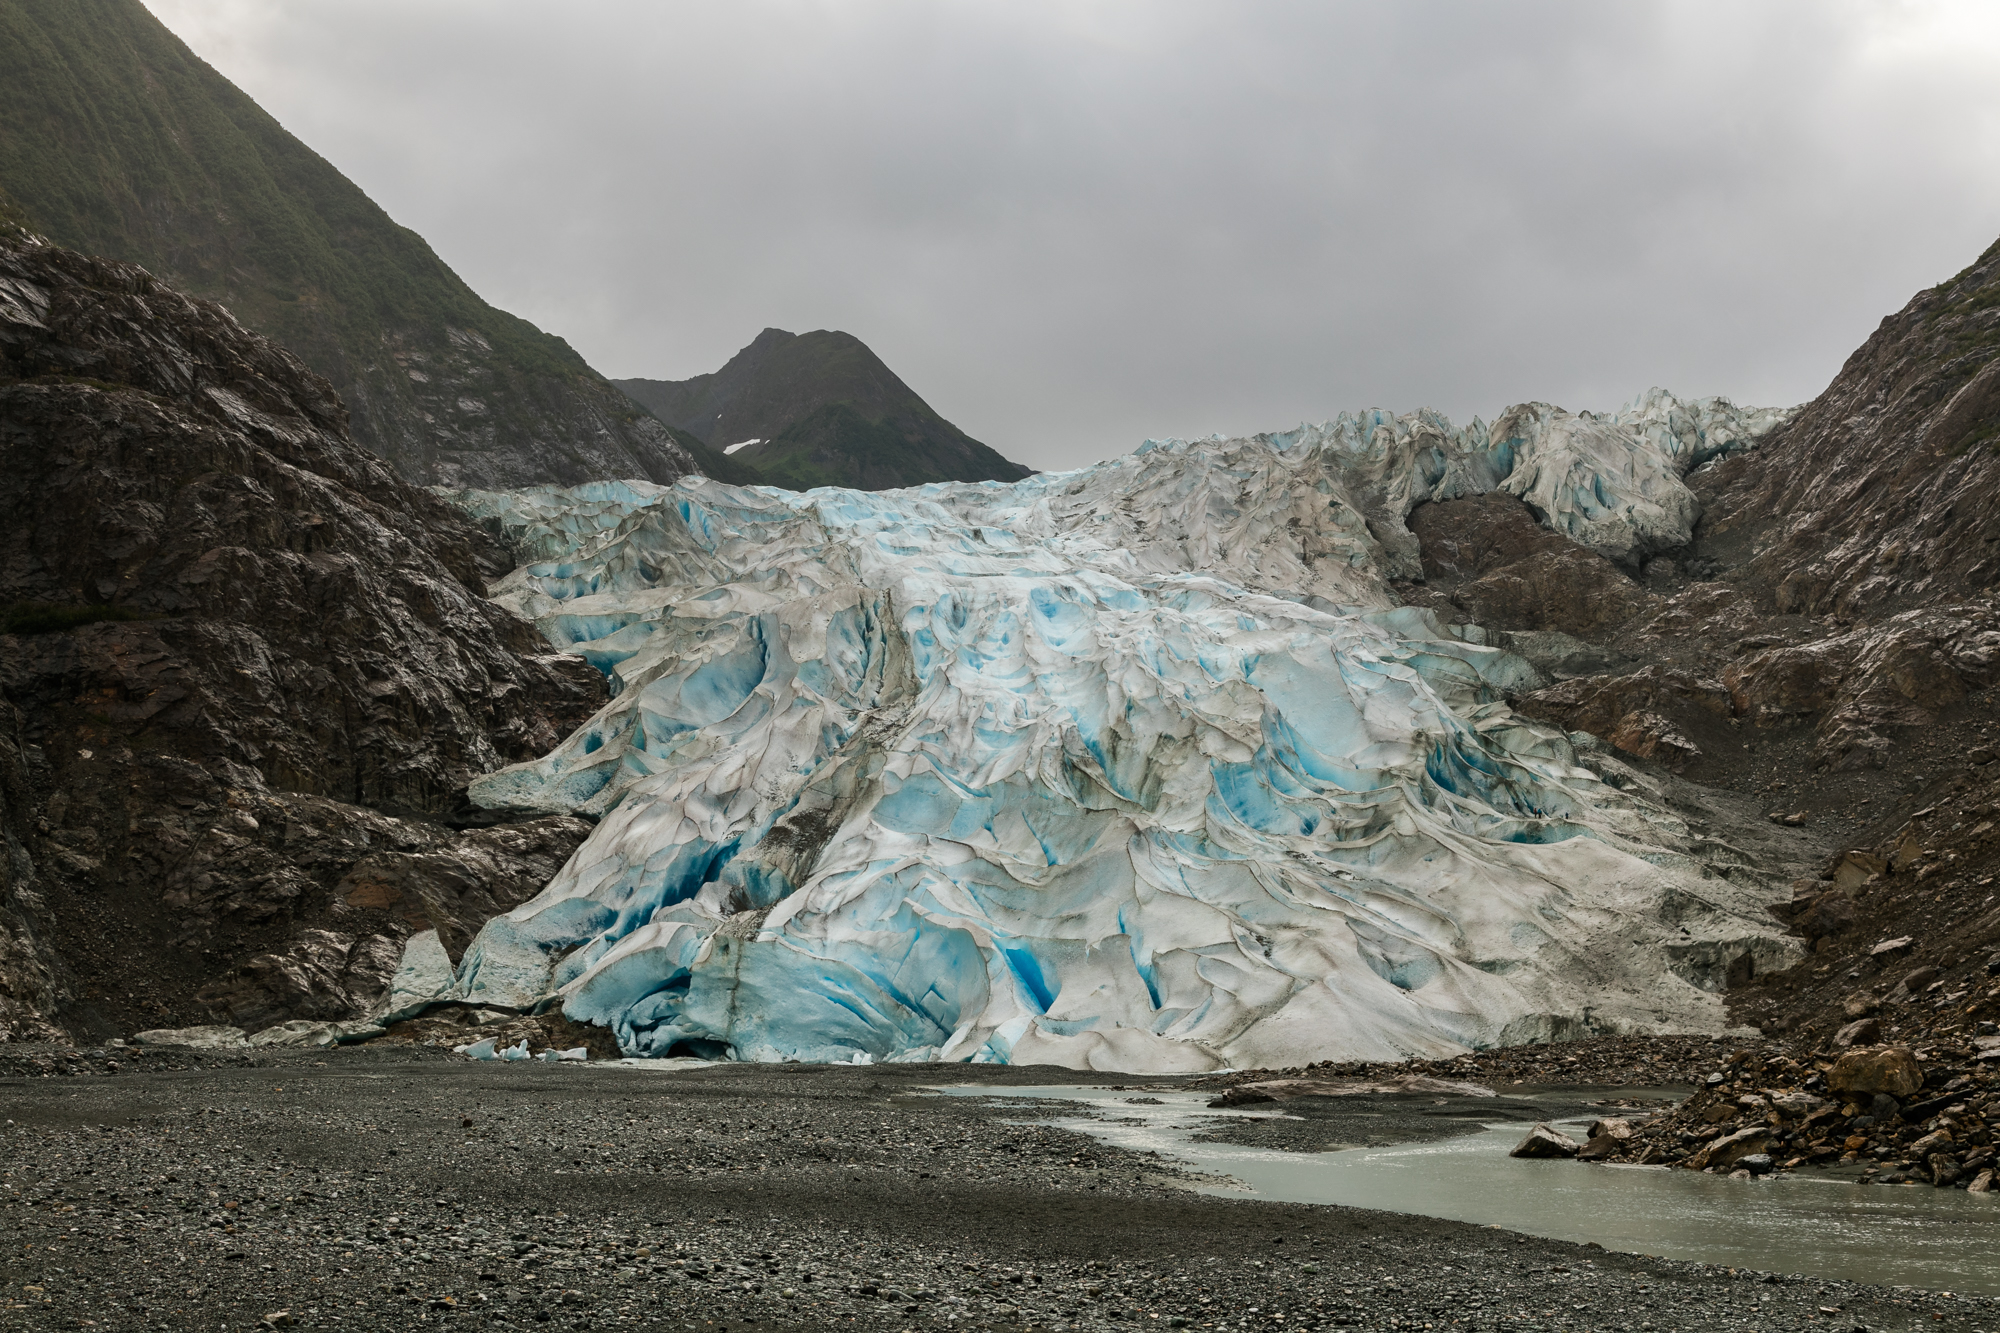 Davidson Glacier, Haines, Alaska, United States. The glacier, a touristic attraction in Haines, was discovered by 1867.